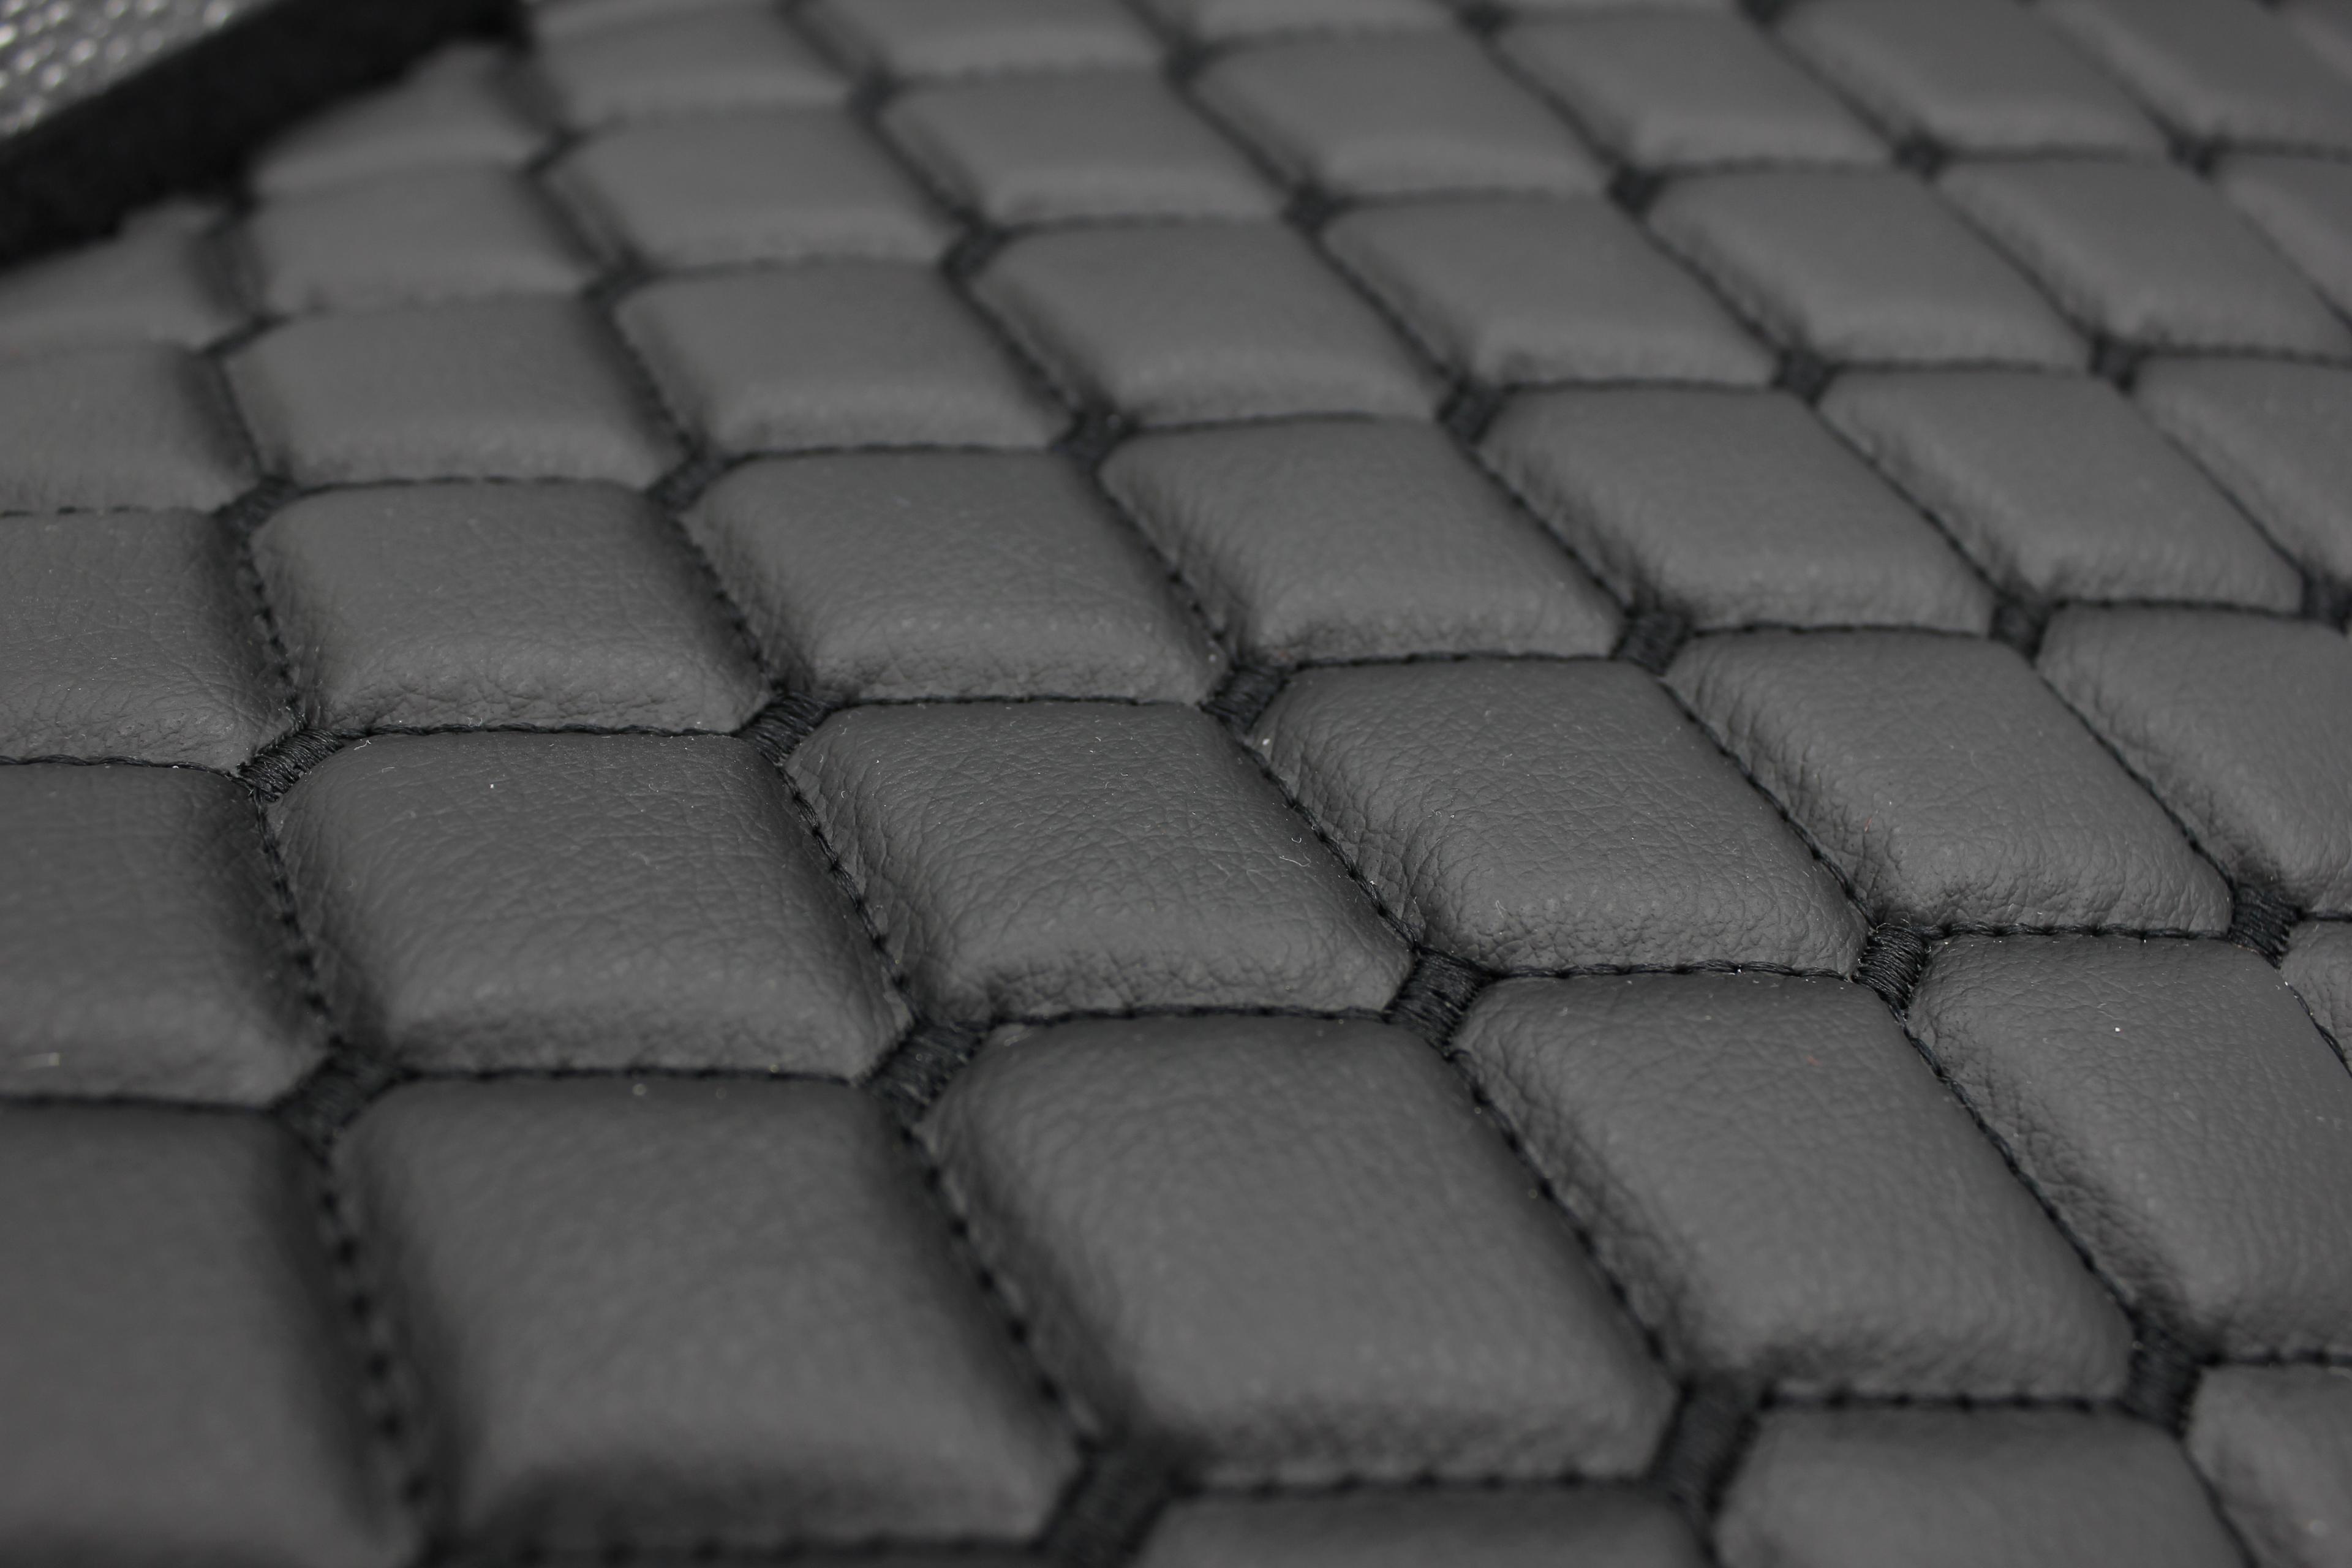 Black Quilted Black Vinyl Faux Leather Car Upholstery Fabric | 2"x2" 5x5cm Diamond Stitch with 5mm Foam Backing | 140cm Wide | Automotive Projects